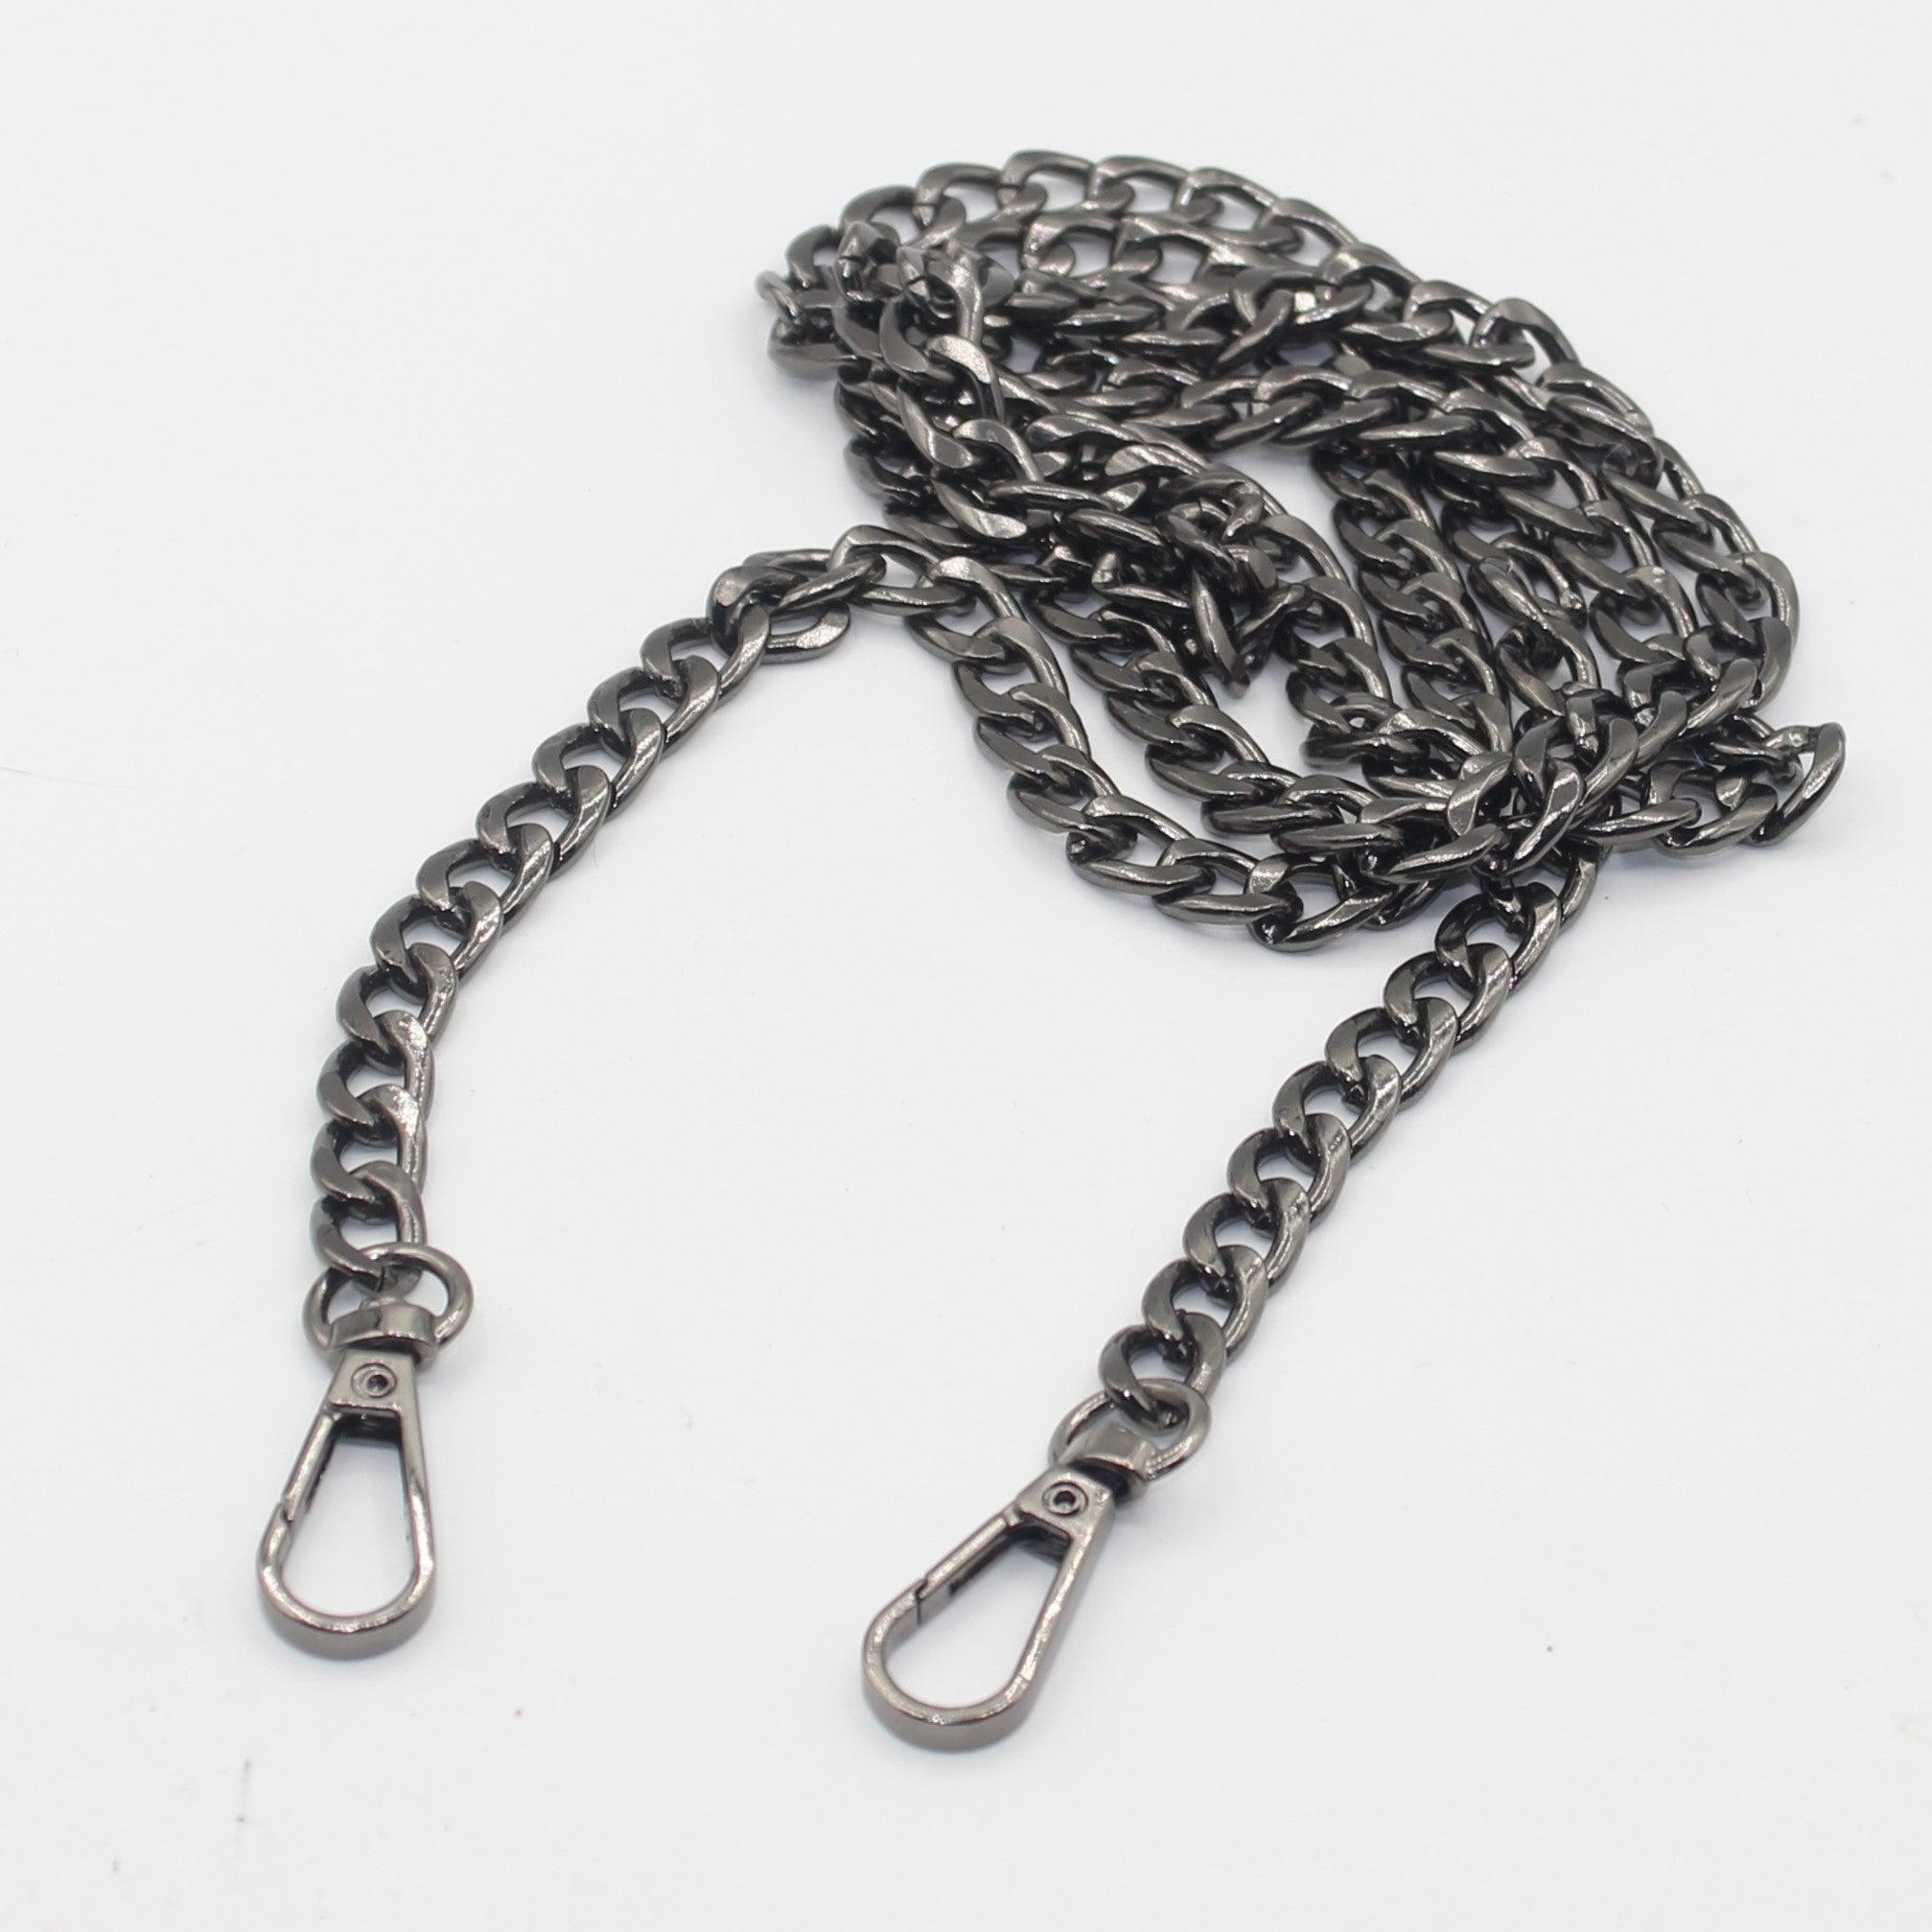 120cm long Chain with Lobsters (8mm rings) #CHAIN534